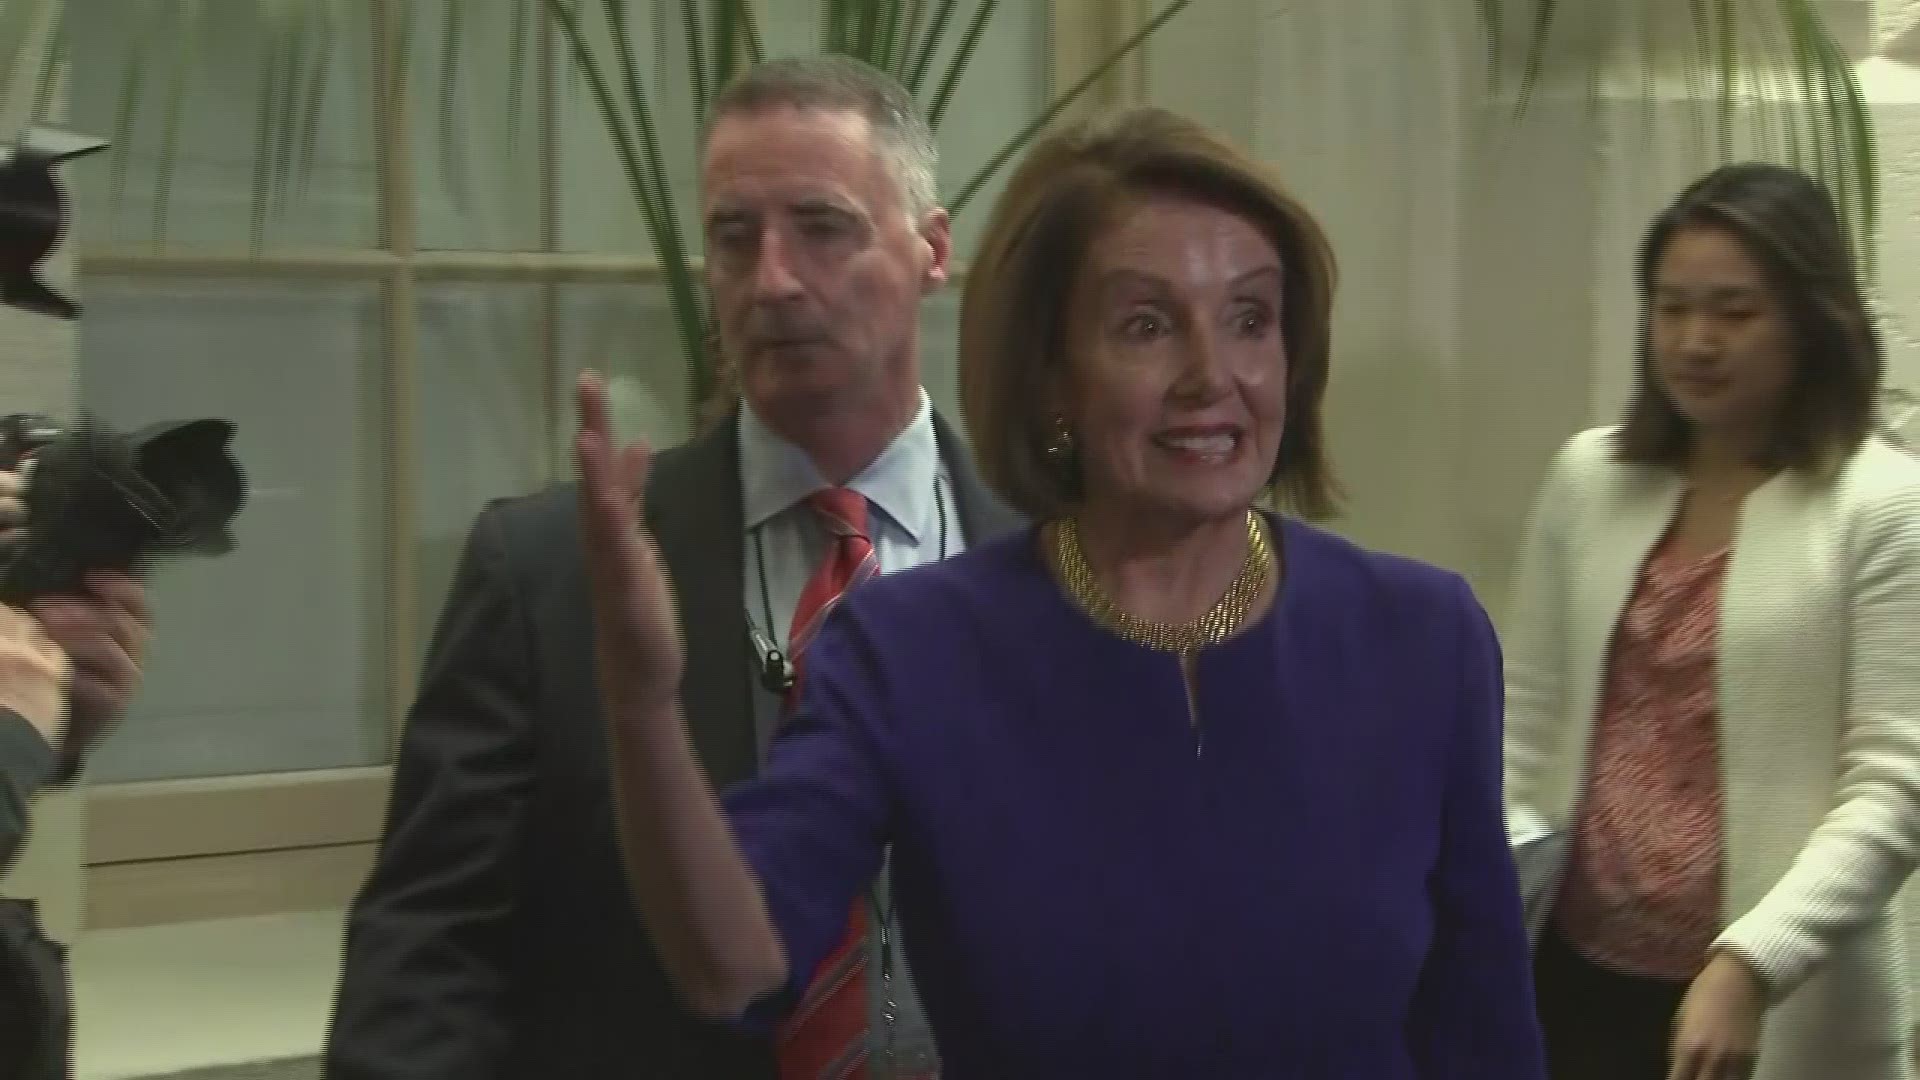 Amid rising calls for impeachment hearings, House Speaker Nancy Pelosi and heads of five Democratic committees are sending a message to their caucus: 'persistence but patience.'